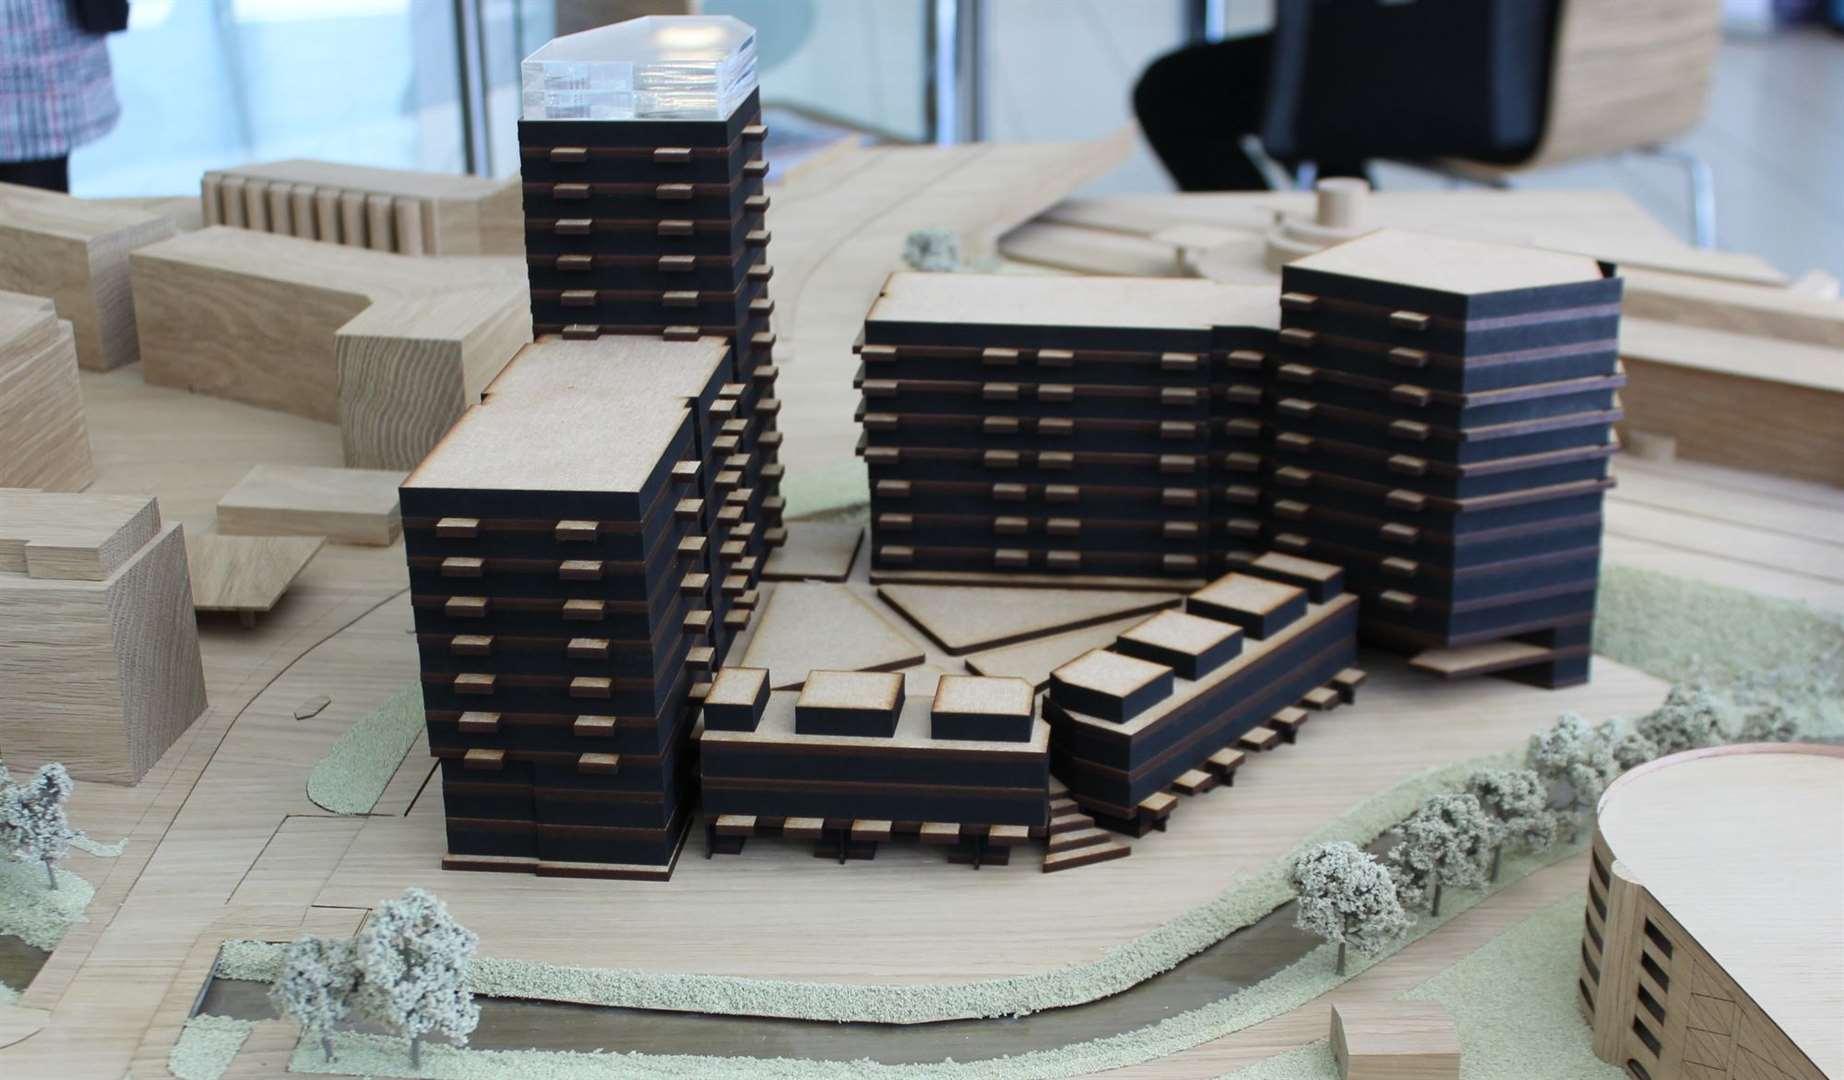 A model was displayed at a public consultation last year showing the scheme. Picture: Jeff Sims